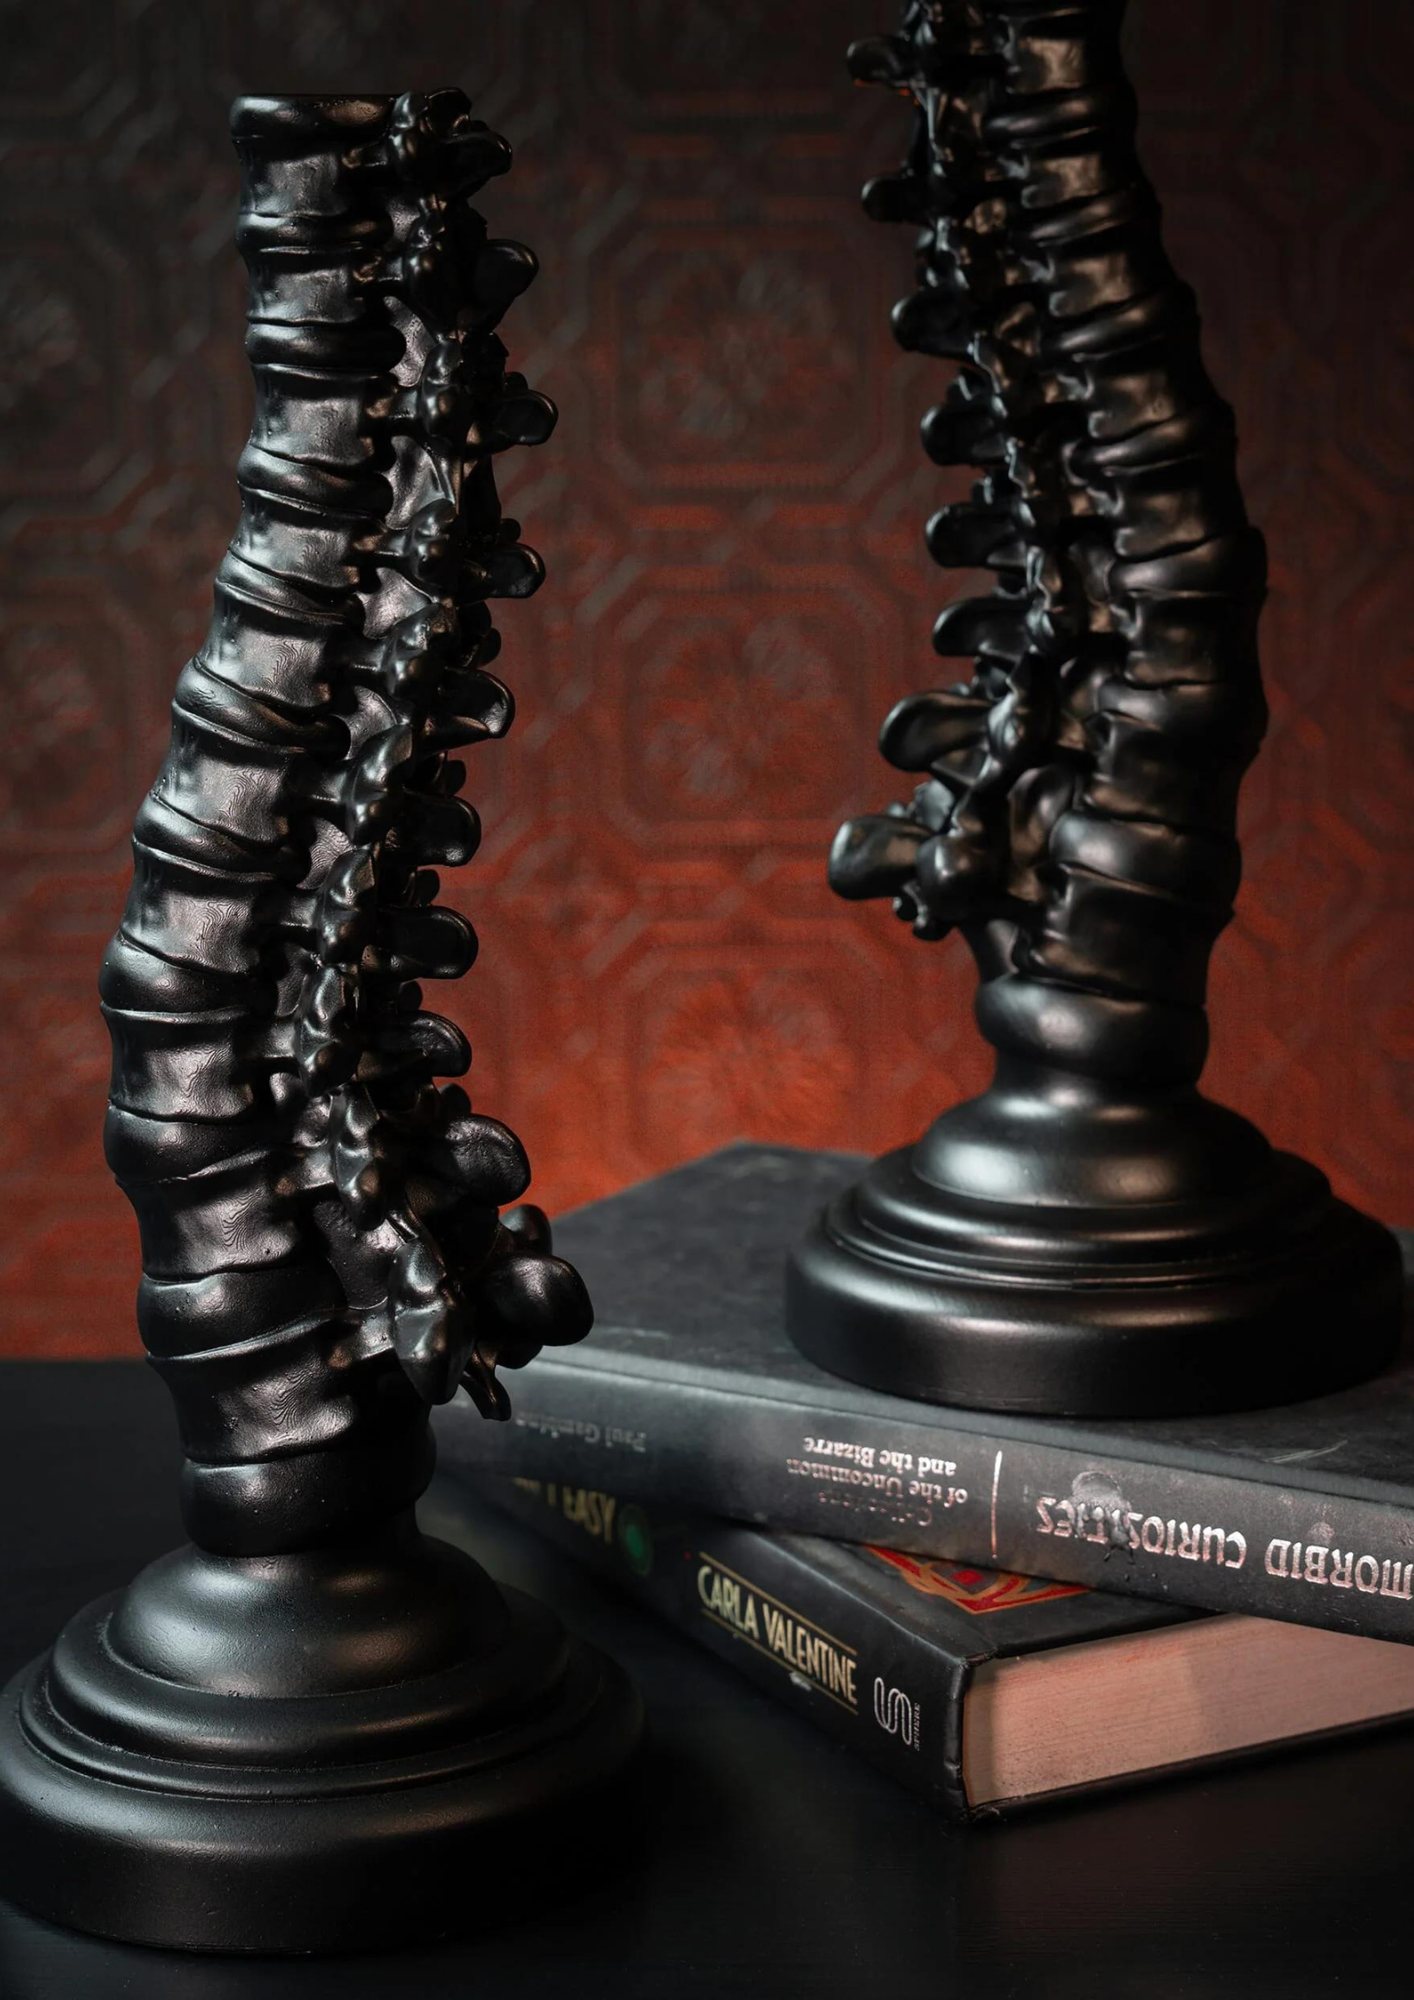 Spine Candlestick Holder by The Blackened Teeth